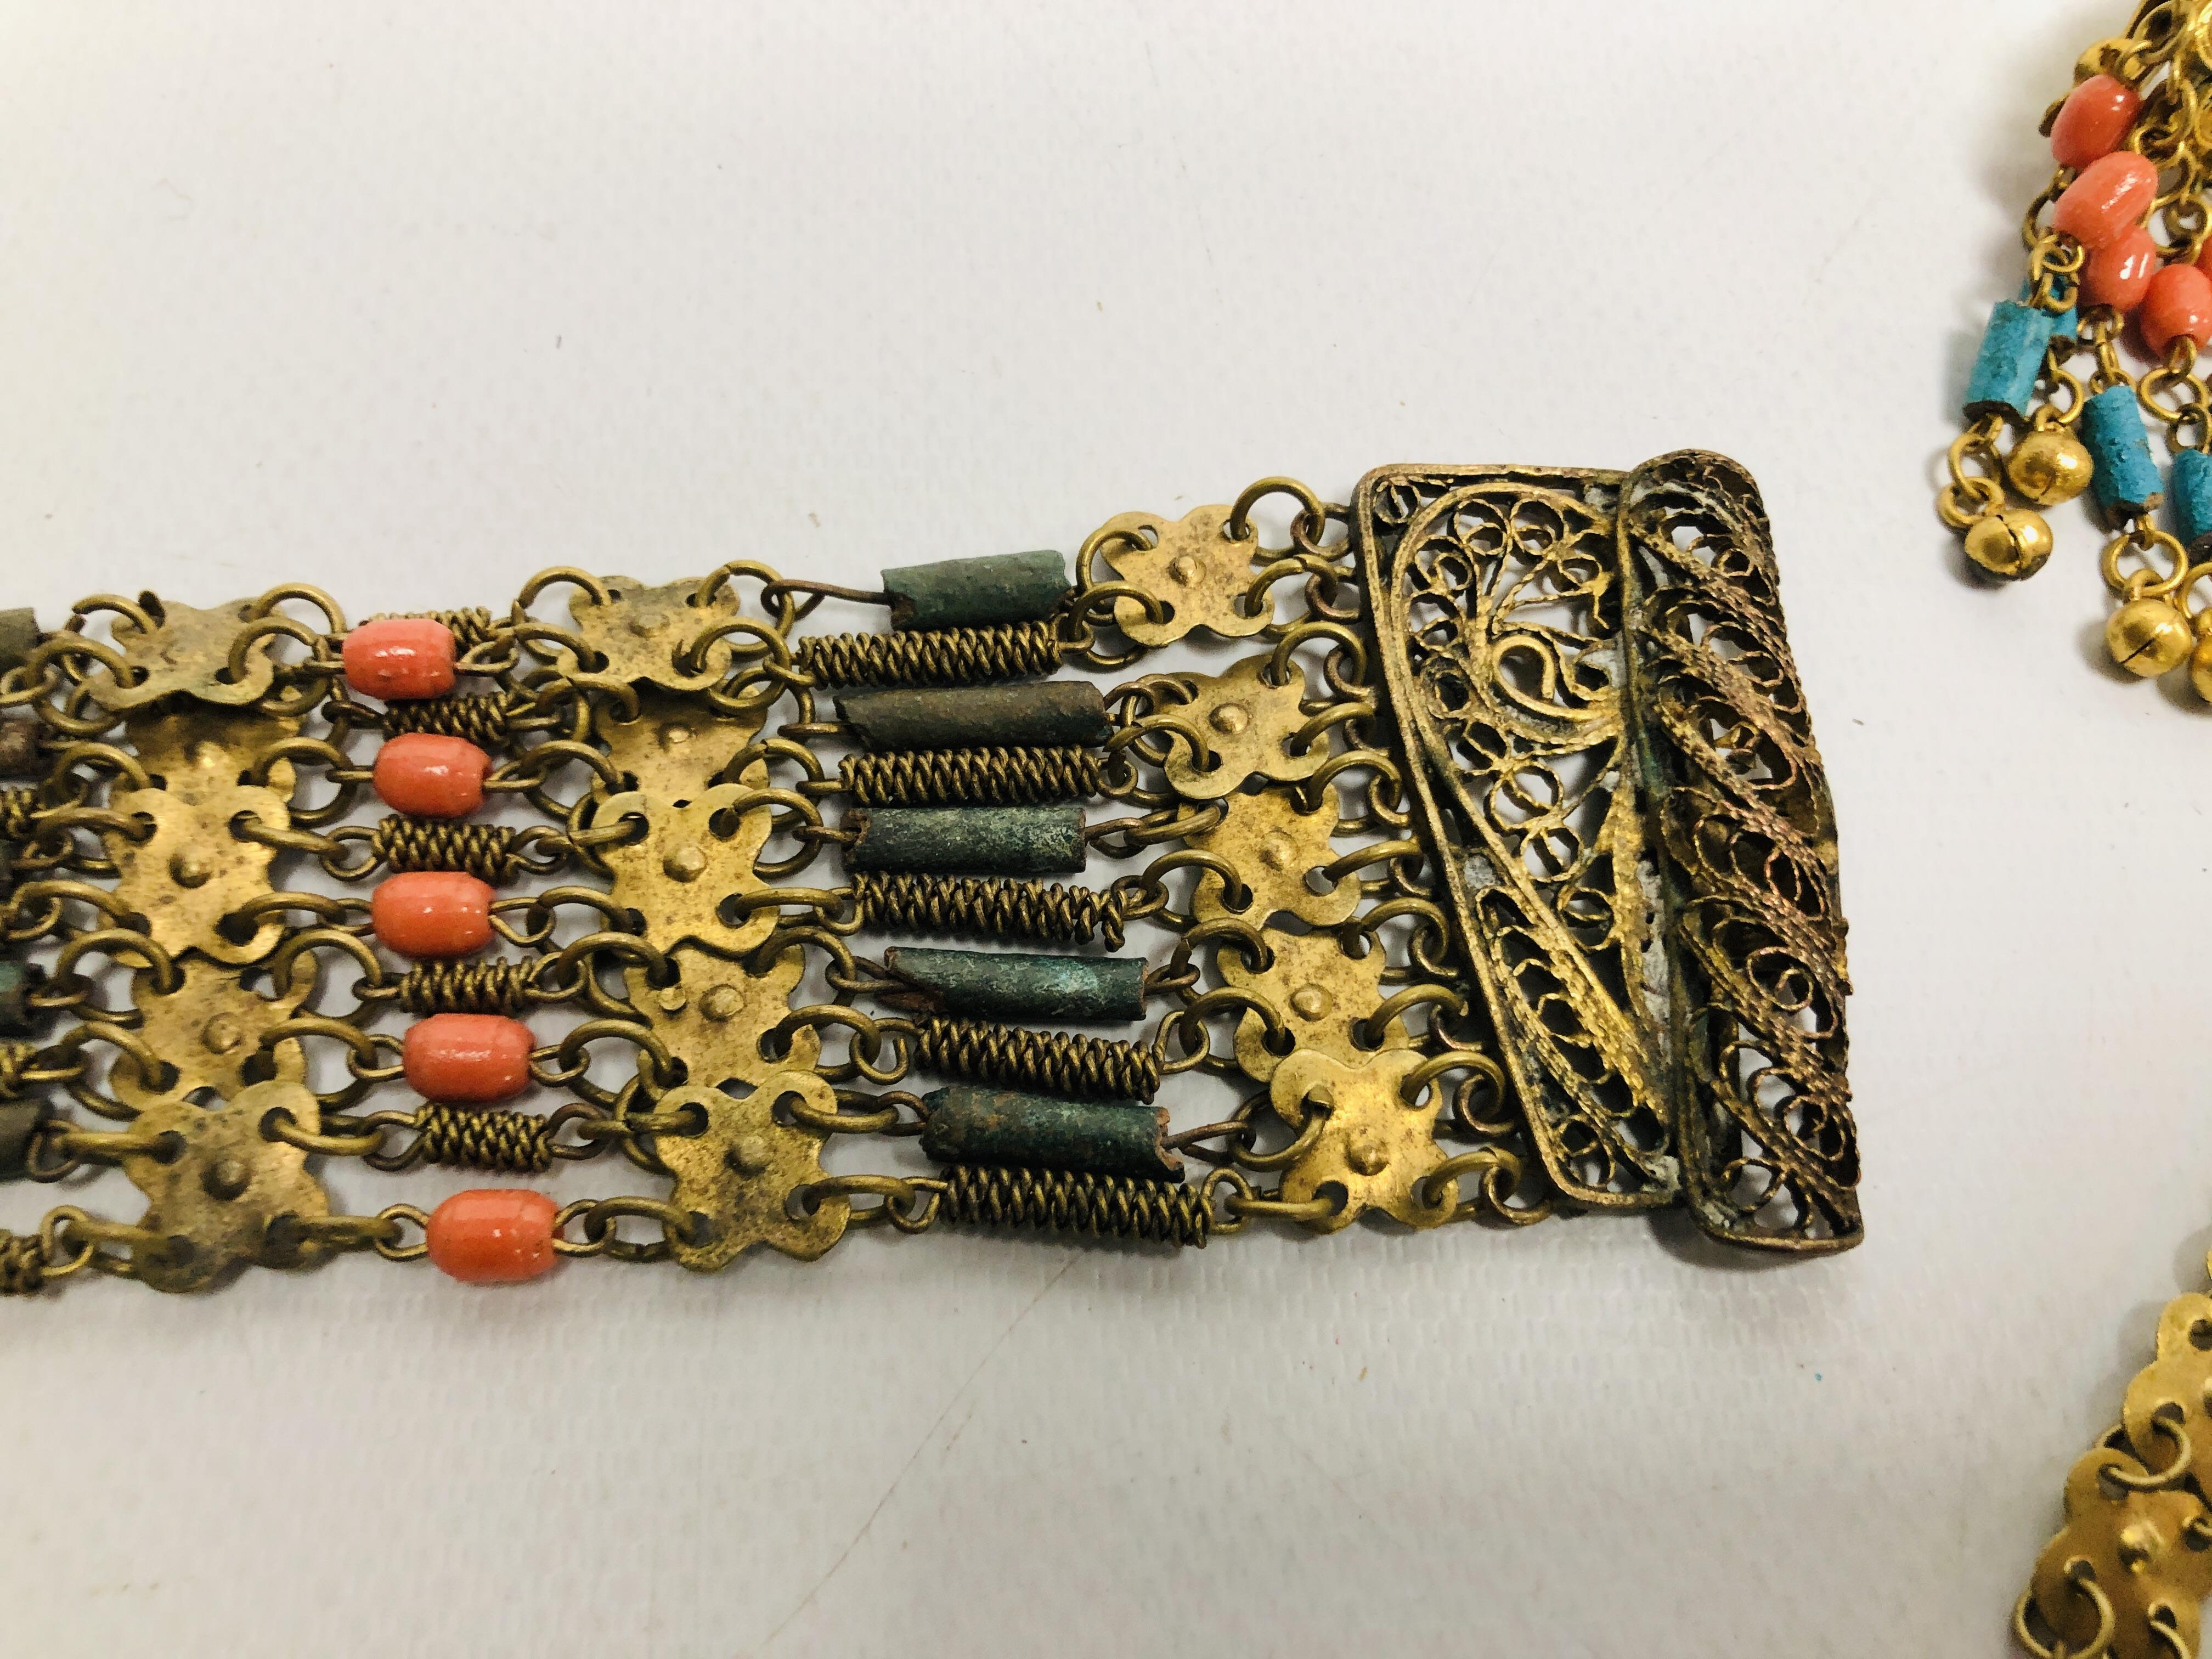 AN EGYPTIAN STYLE JEWELLERY SET COMPRISING OF A CUFF BRACELET, CLIP EARRINGS AND FACE COVERING, - Image 5 of 12